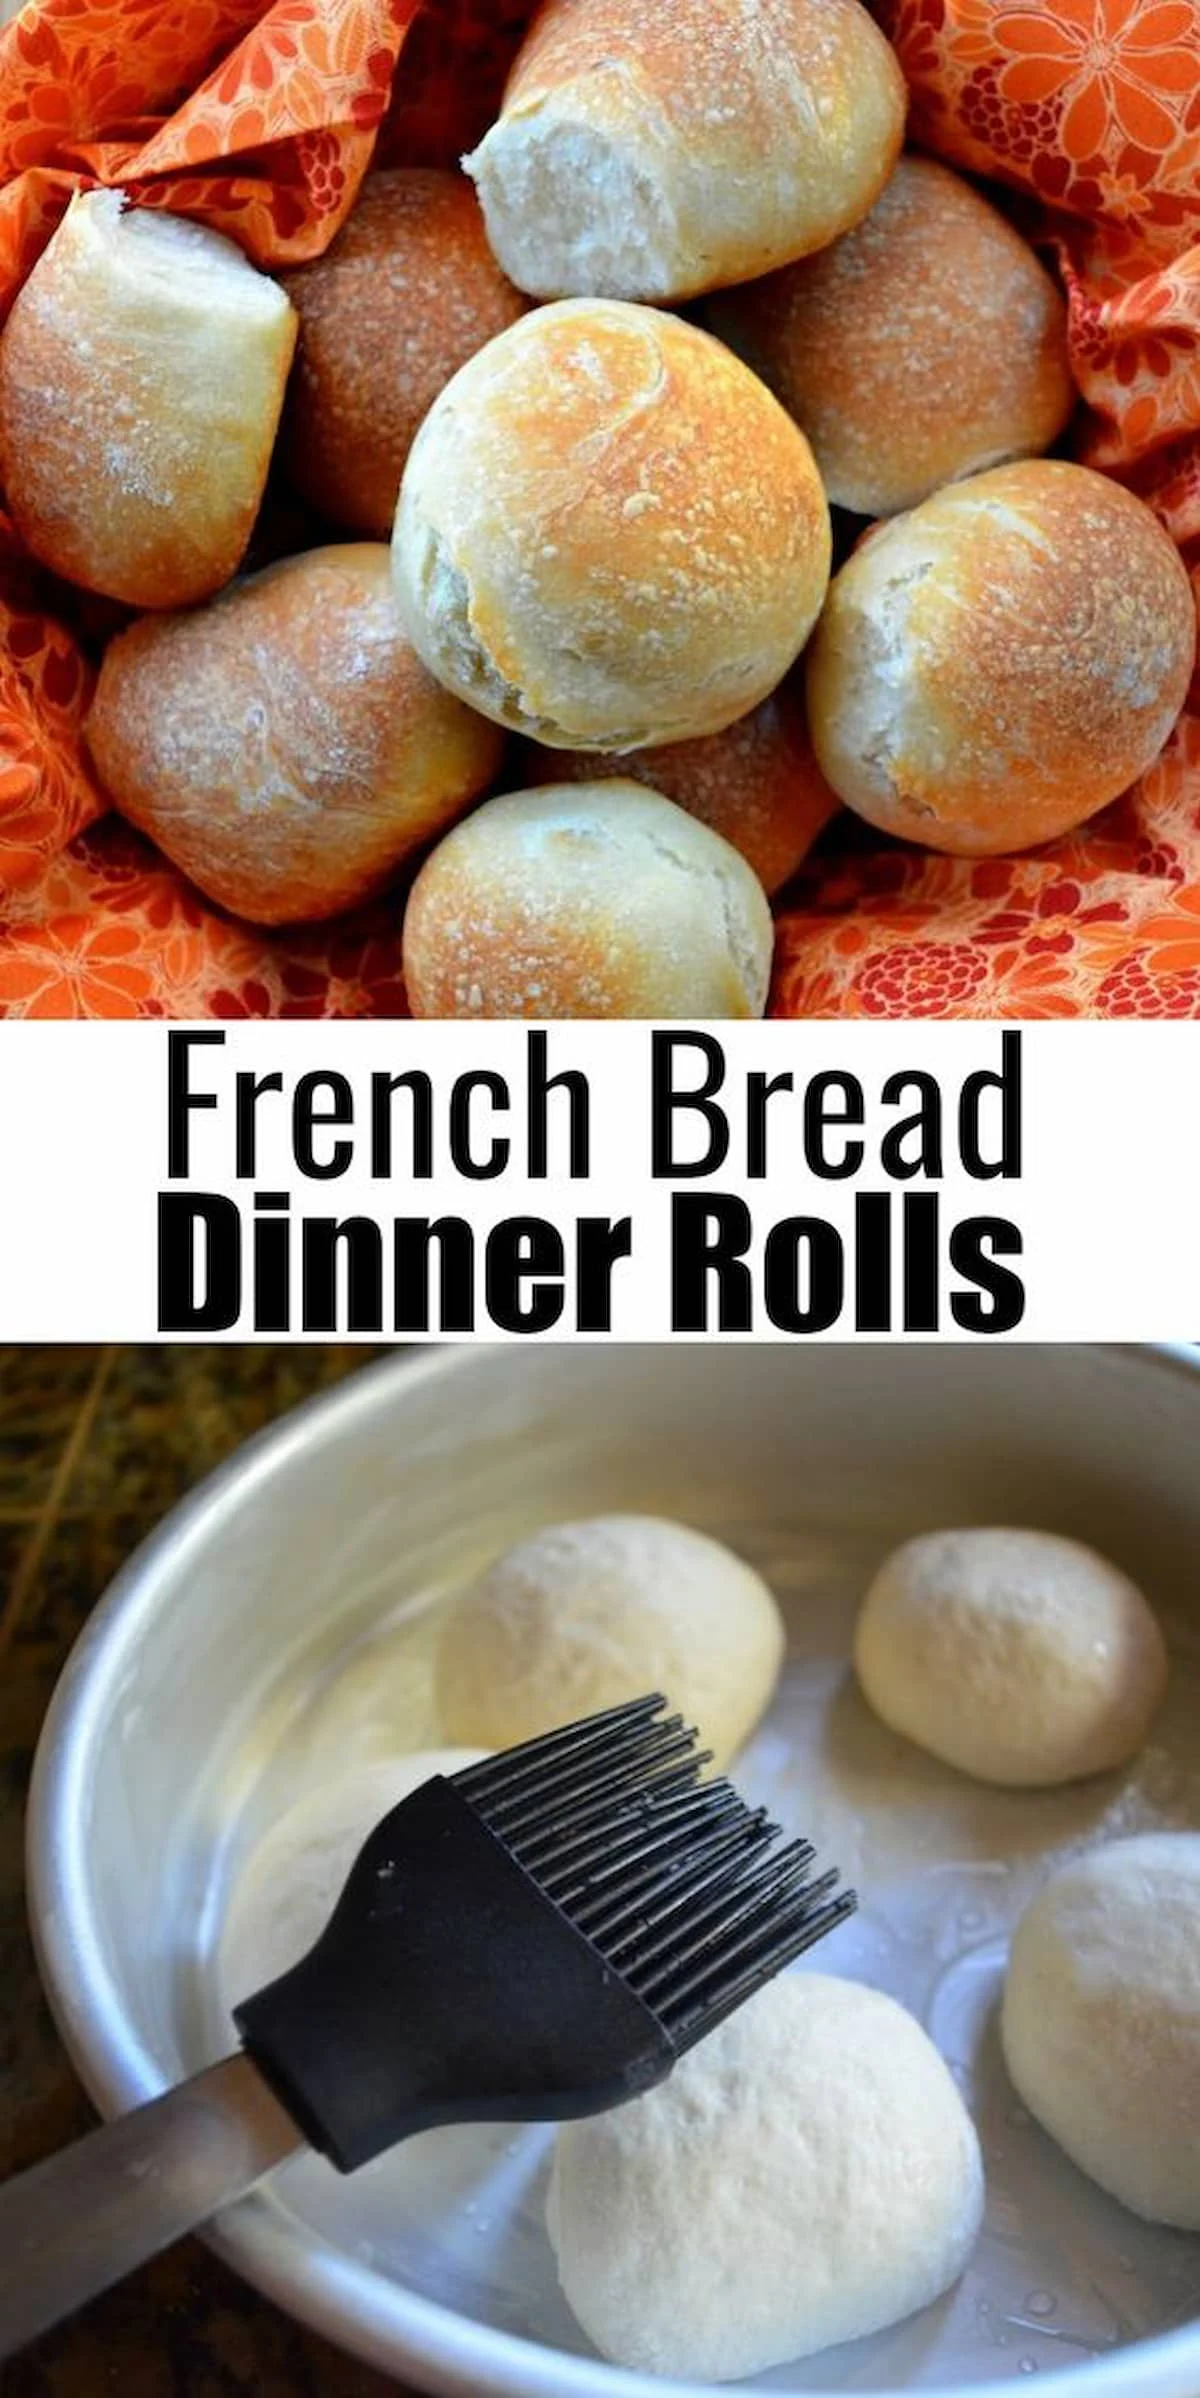 French Bread Dinner Rolls top photo is a basket lined with a orange flower print cloth full of Baked French Bread Dinner Rolls and the bottom photo is of unbaked French Bread Dinner Rolls being sprinkled with water. Black text between the two photos French Bread Dinner Rolls.